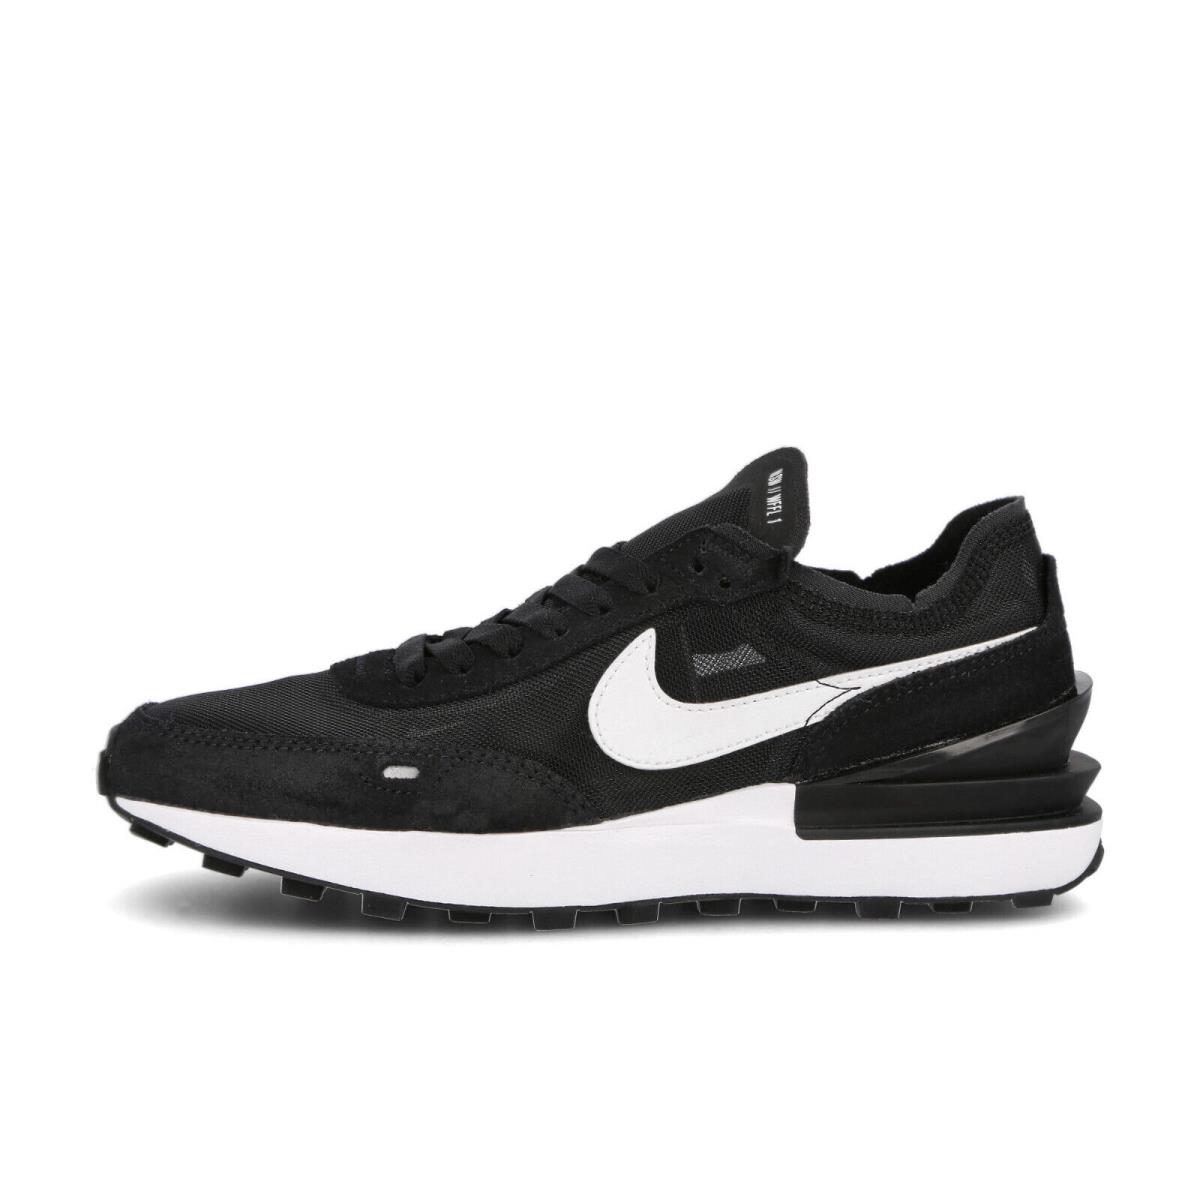 Nike Waffle One Size 7.5 Womens Black White Shoes Sneakers DC2533 001